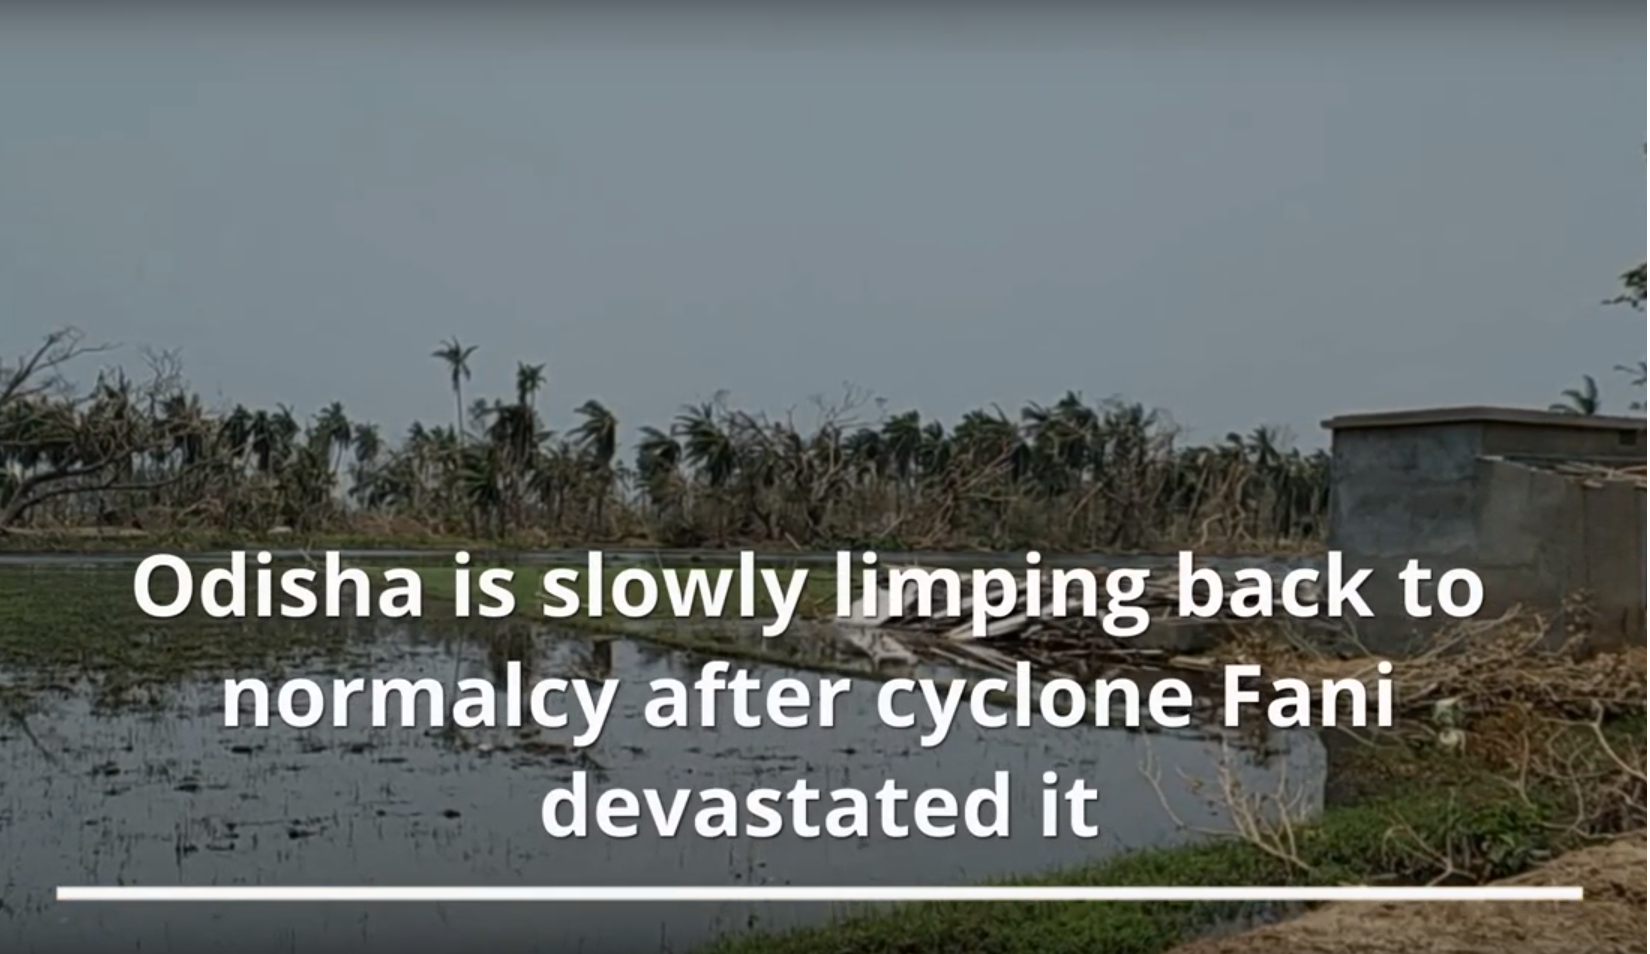 Odisha slowly limps back to normalcy after Cyclone Fani